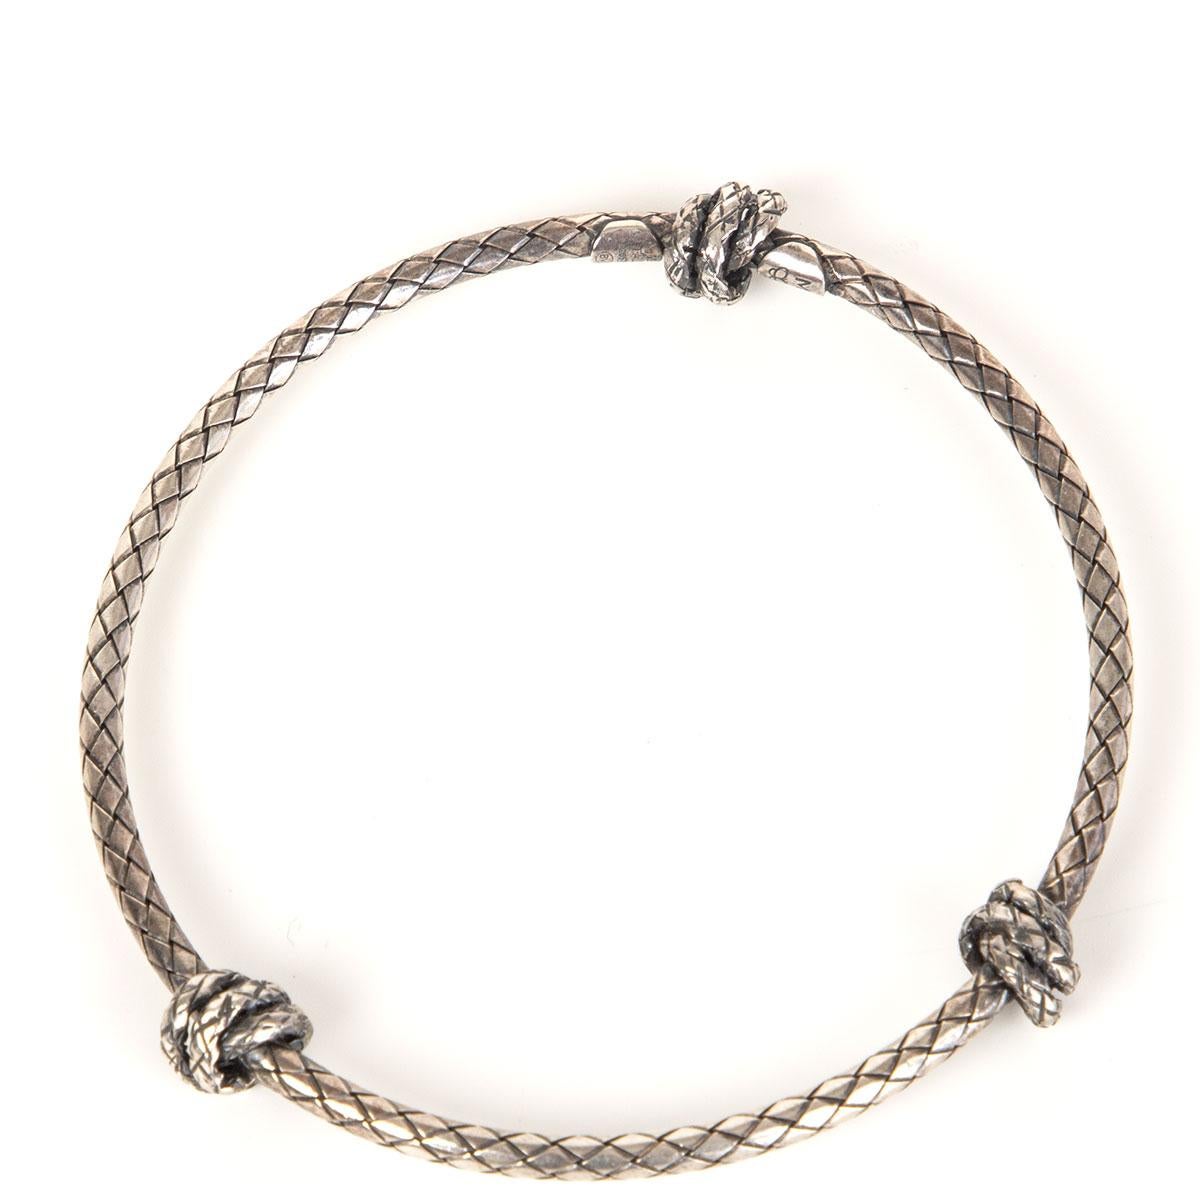 Bottega Veneta intrecciato bangle in oxidized sterling silver with three knots. Has been worn and is in excellent condition.

Circumference 20cm (7.8in)
